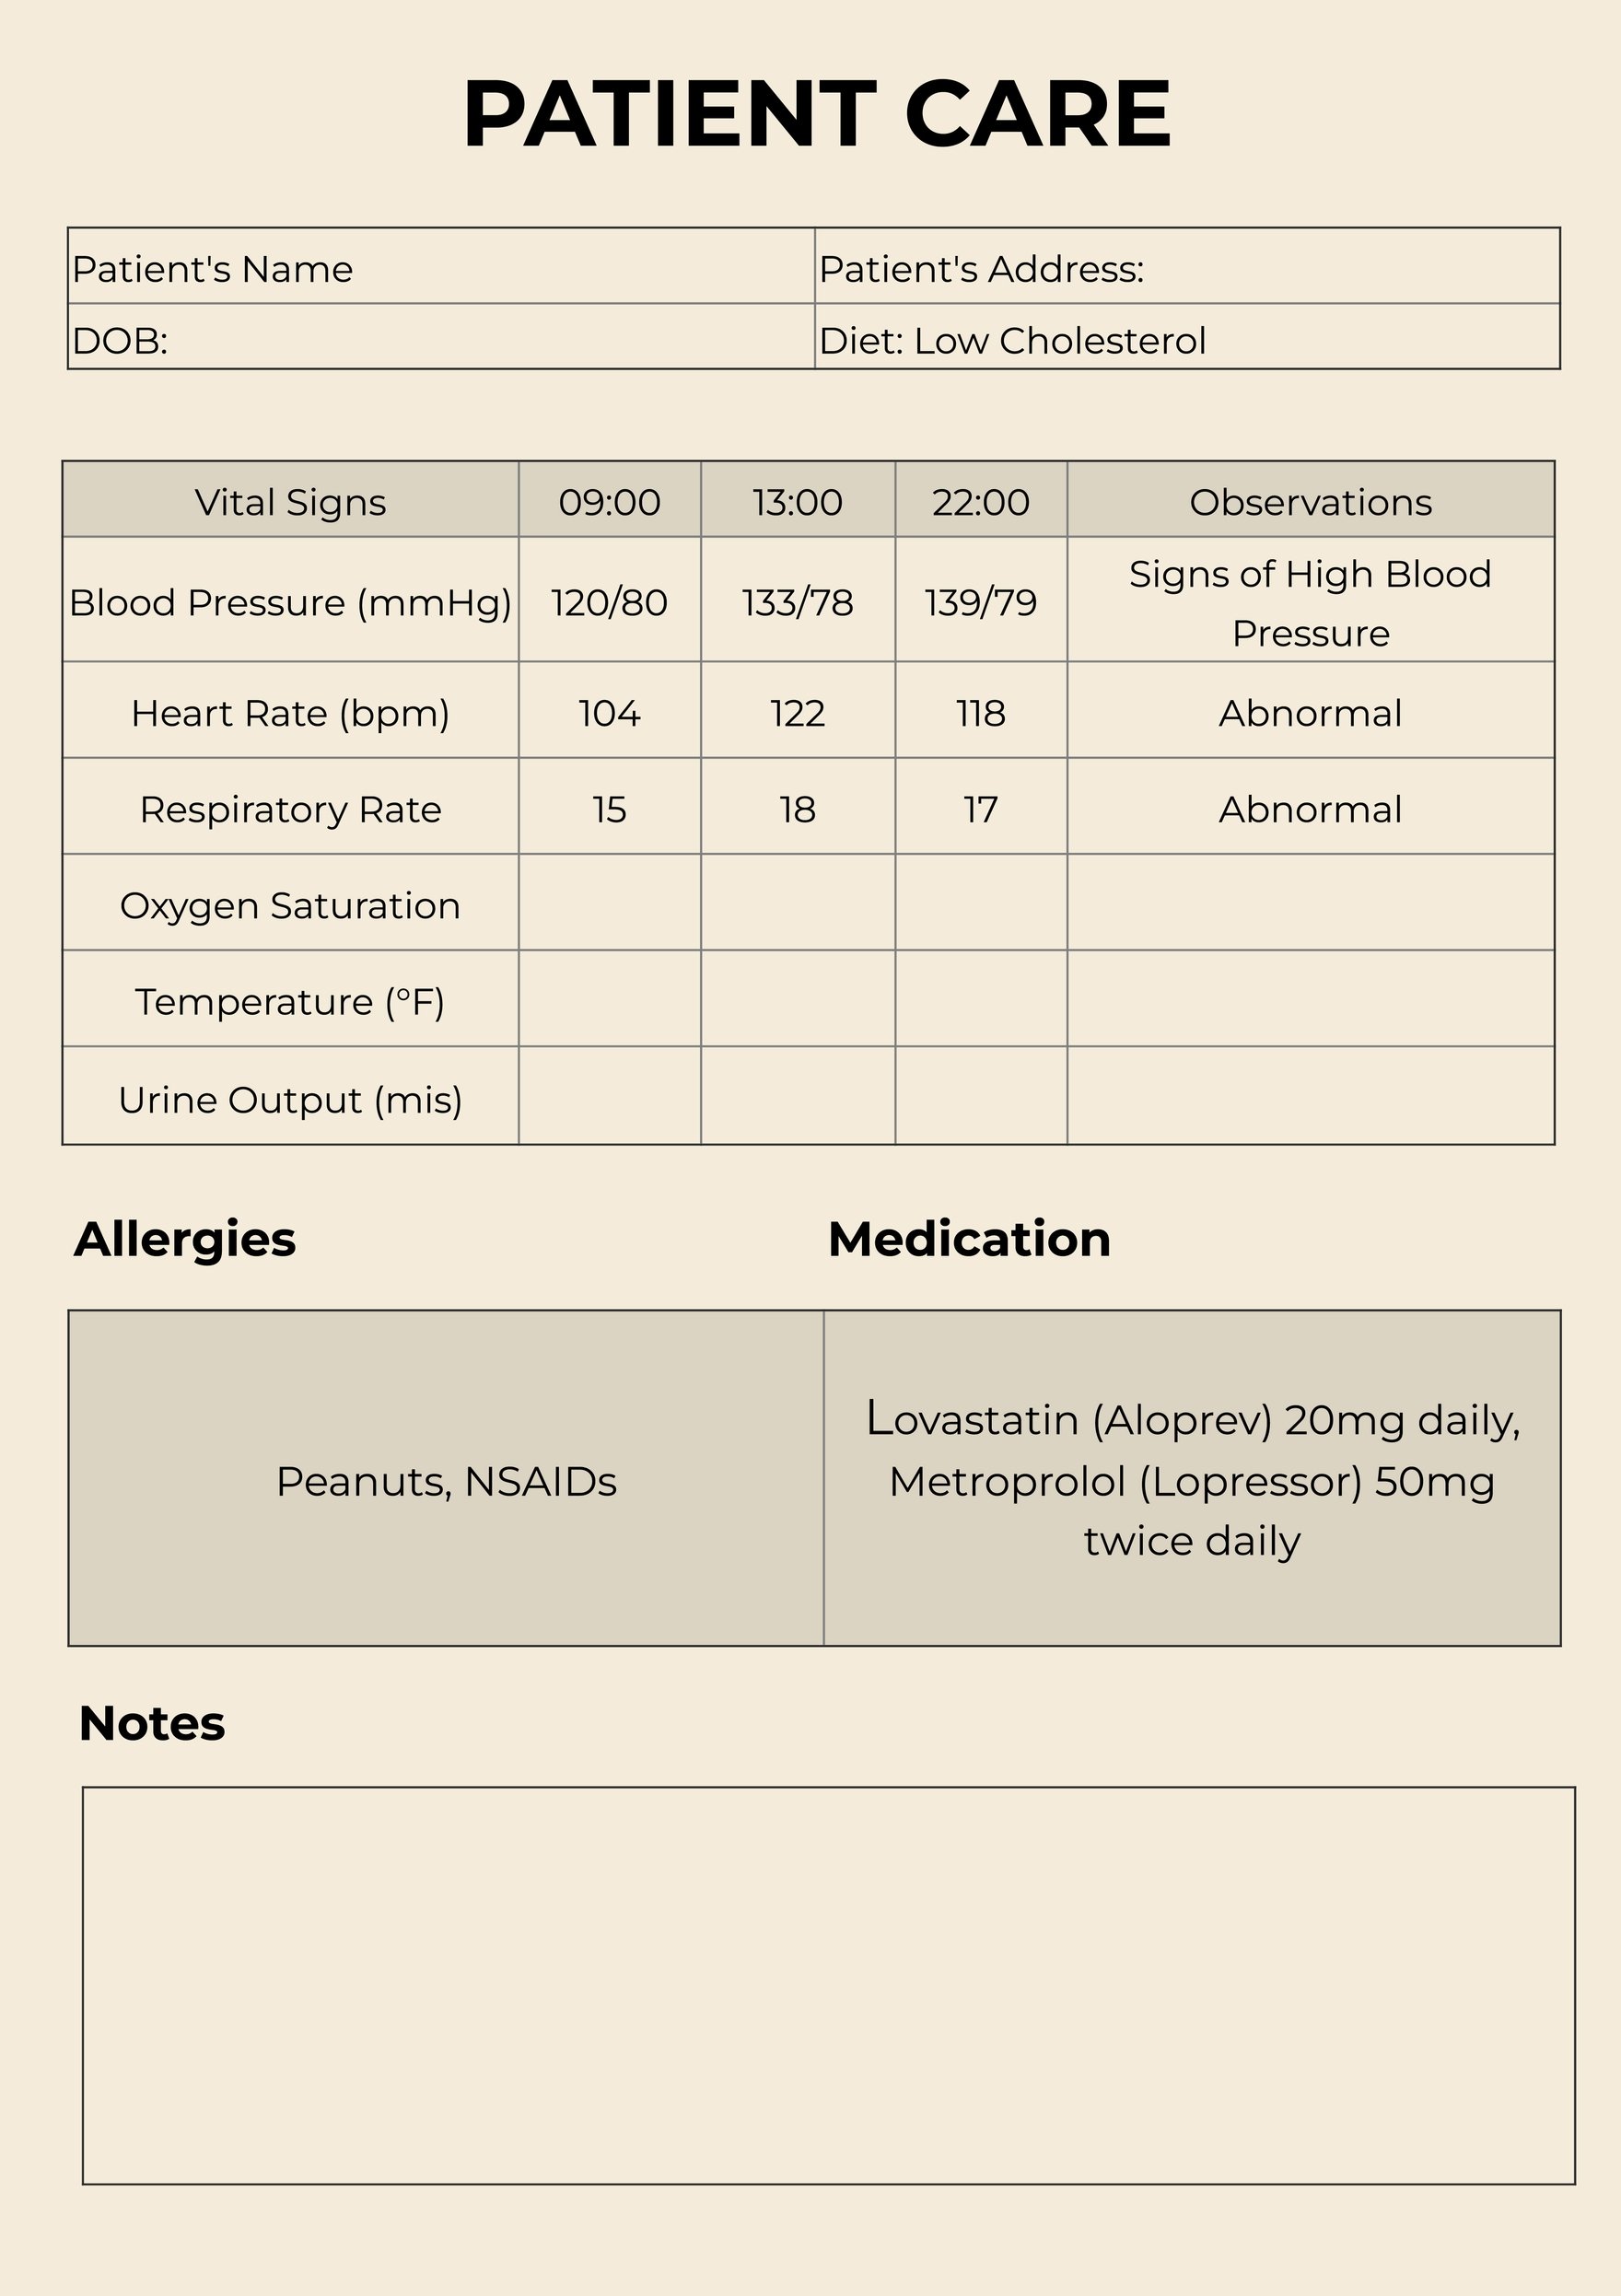 Patient Medical Chart Template